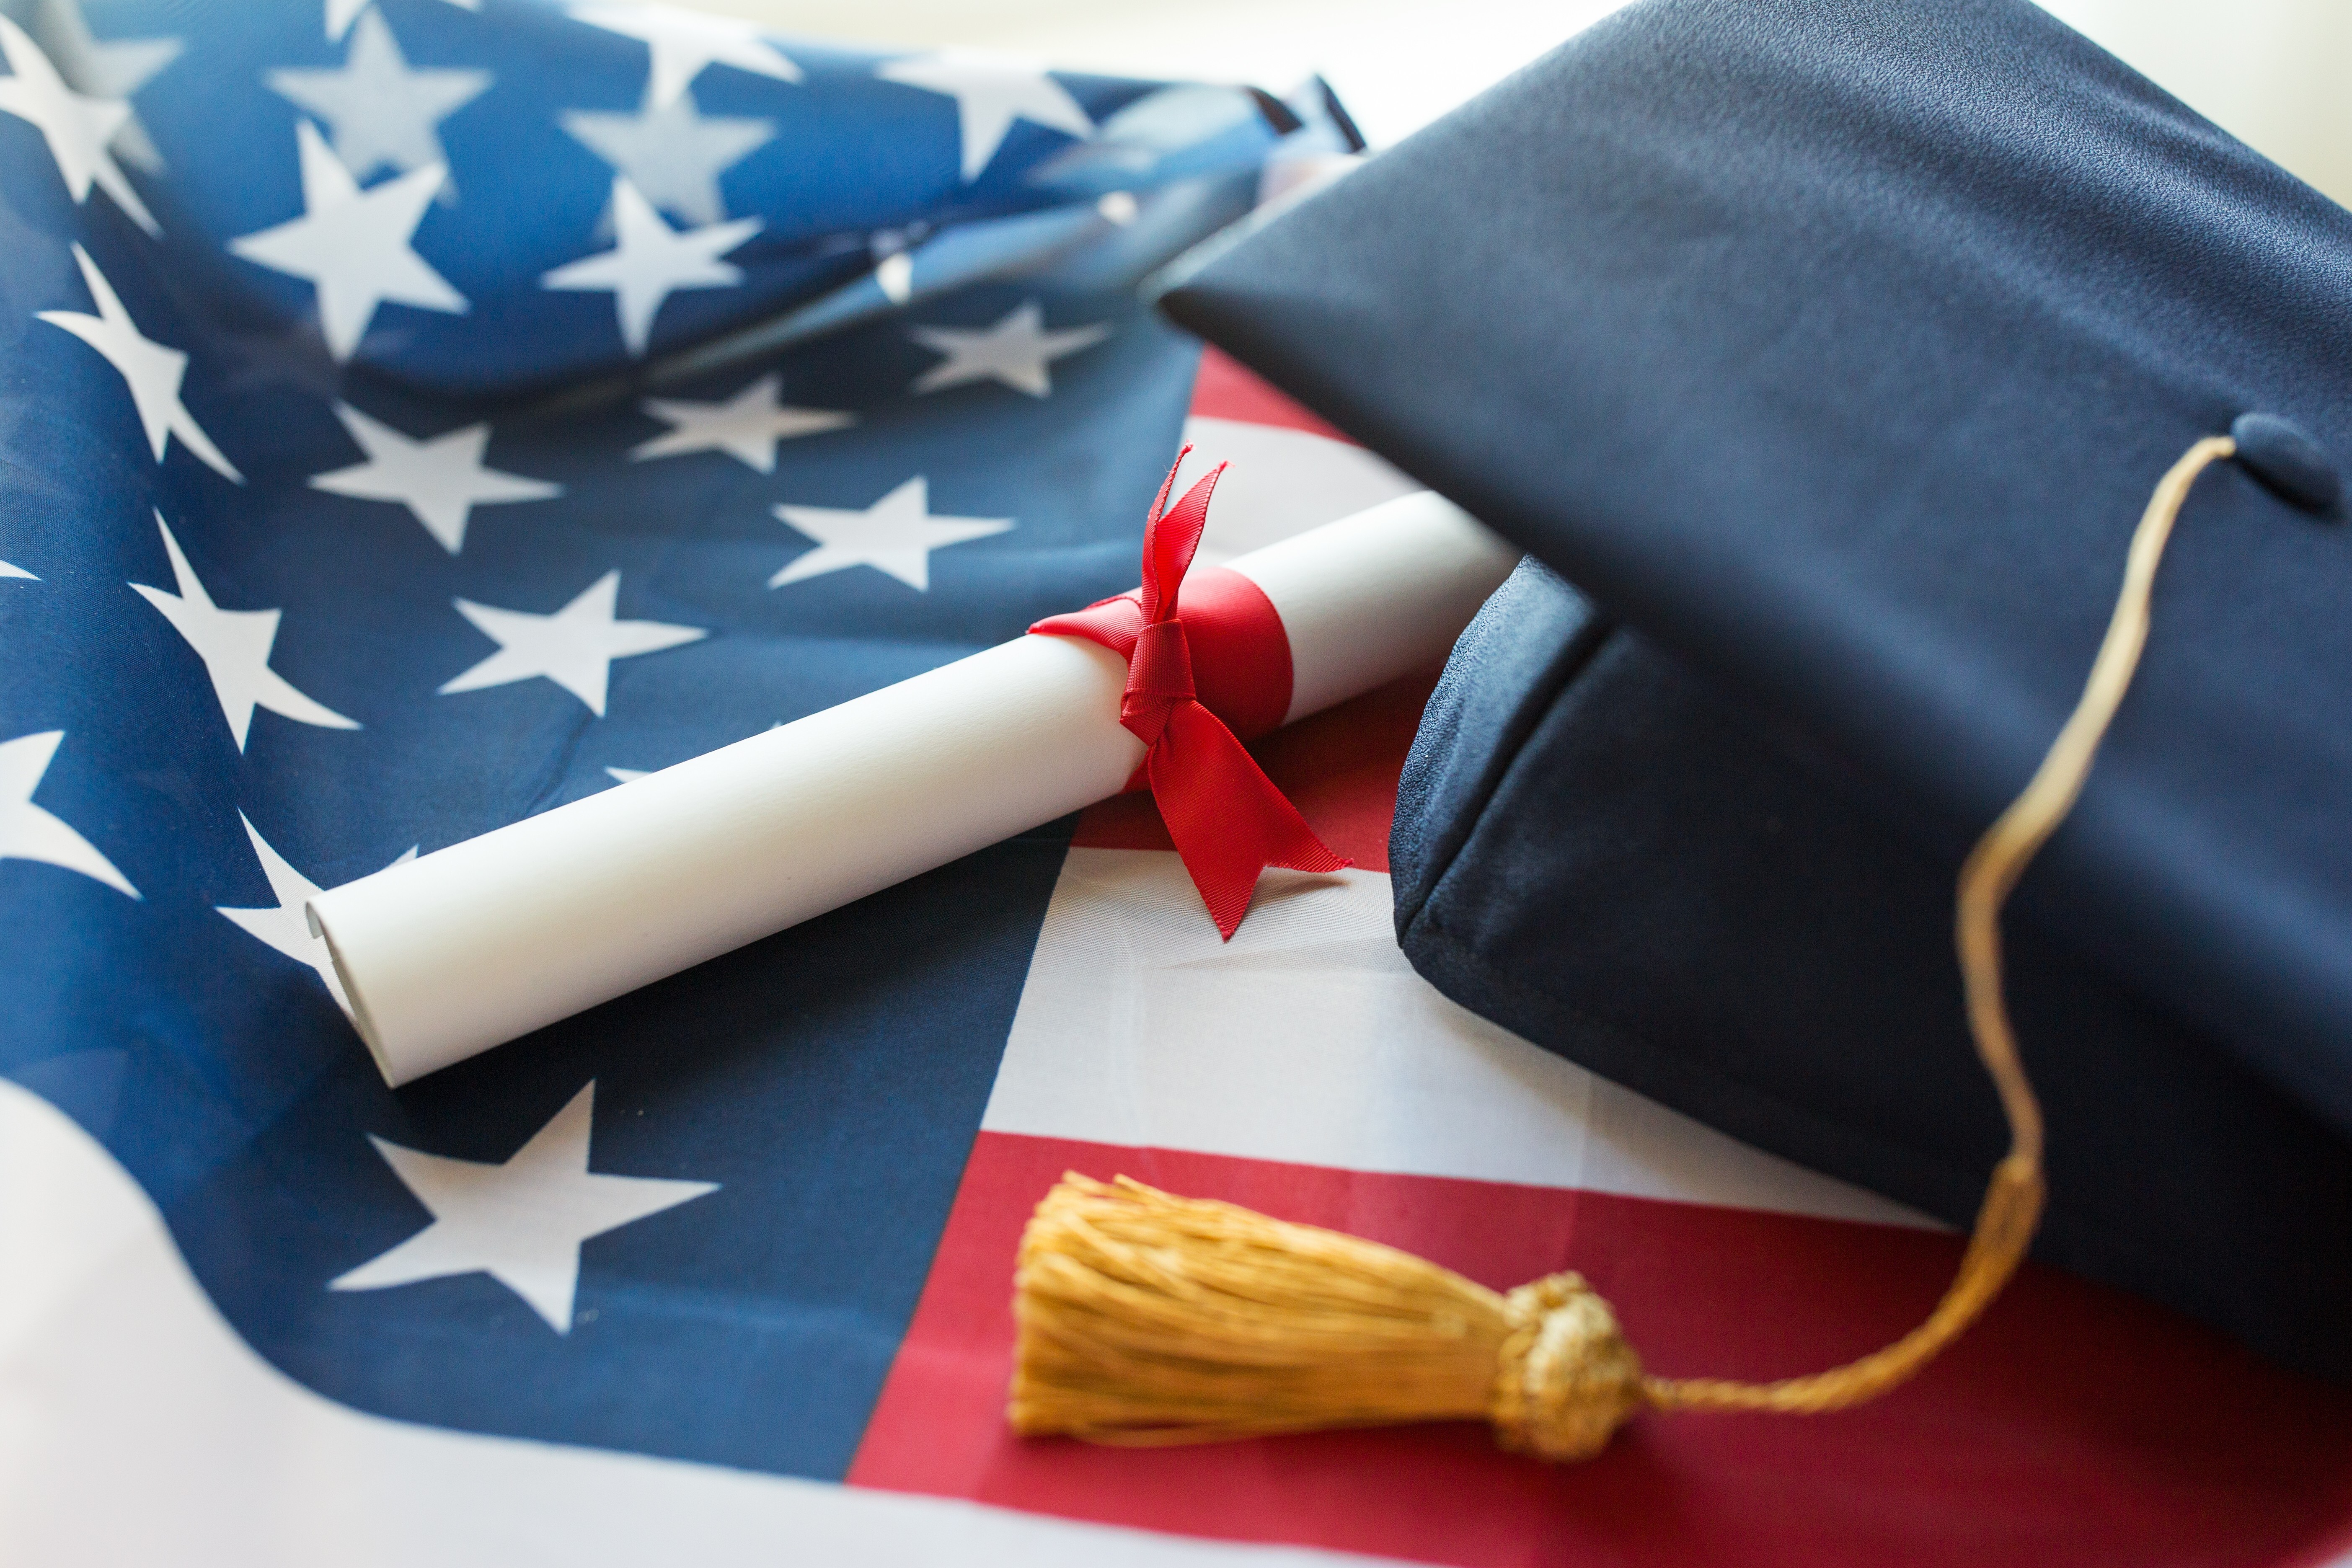 Thinking about going to university in the US? You might need to use the common application.